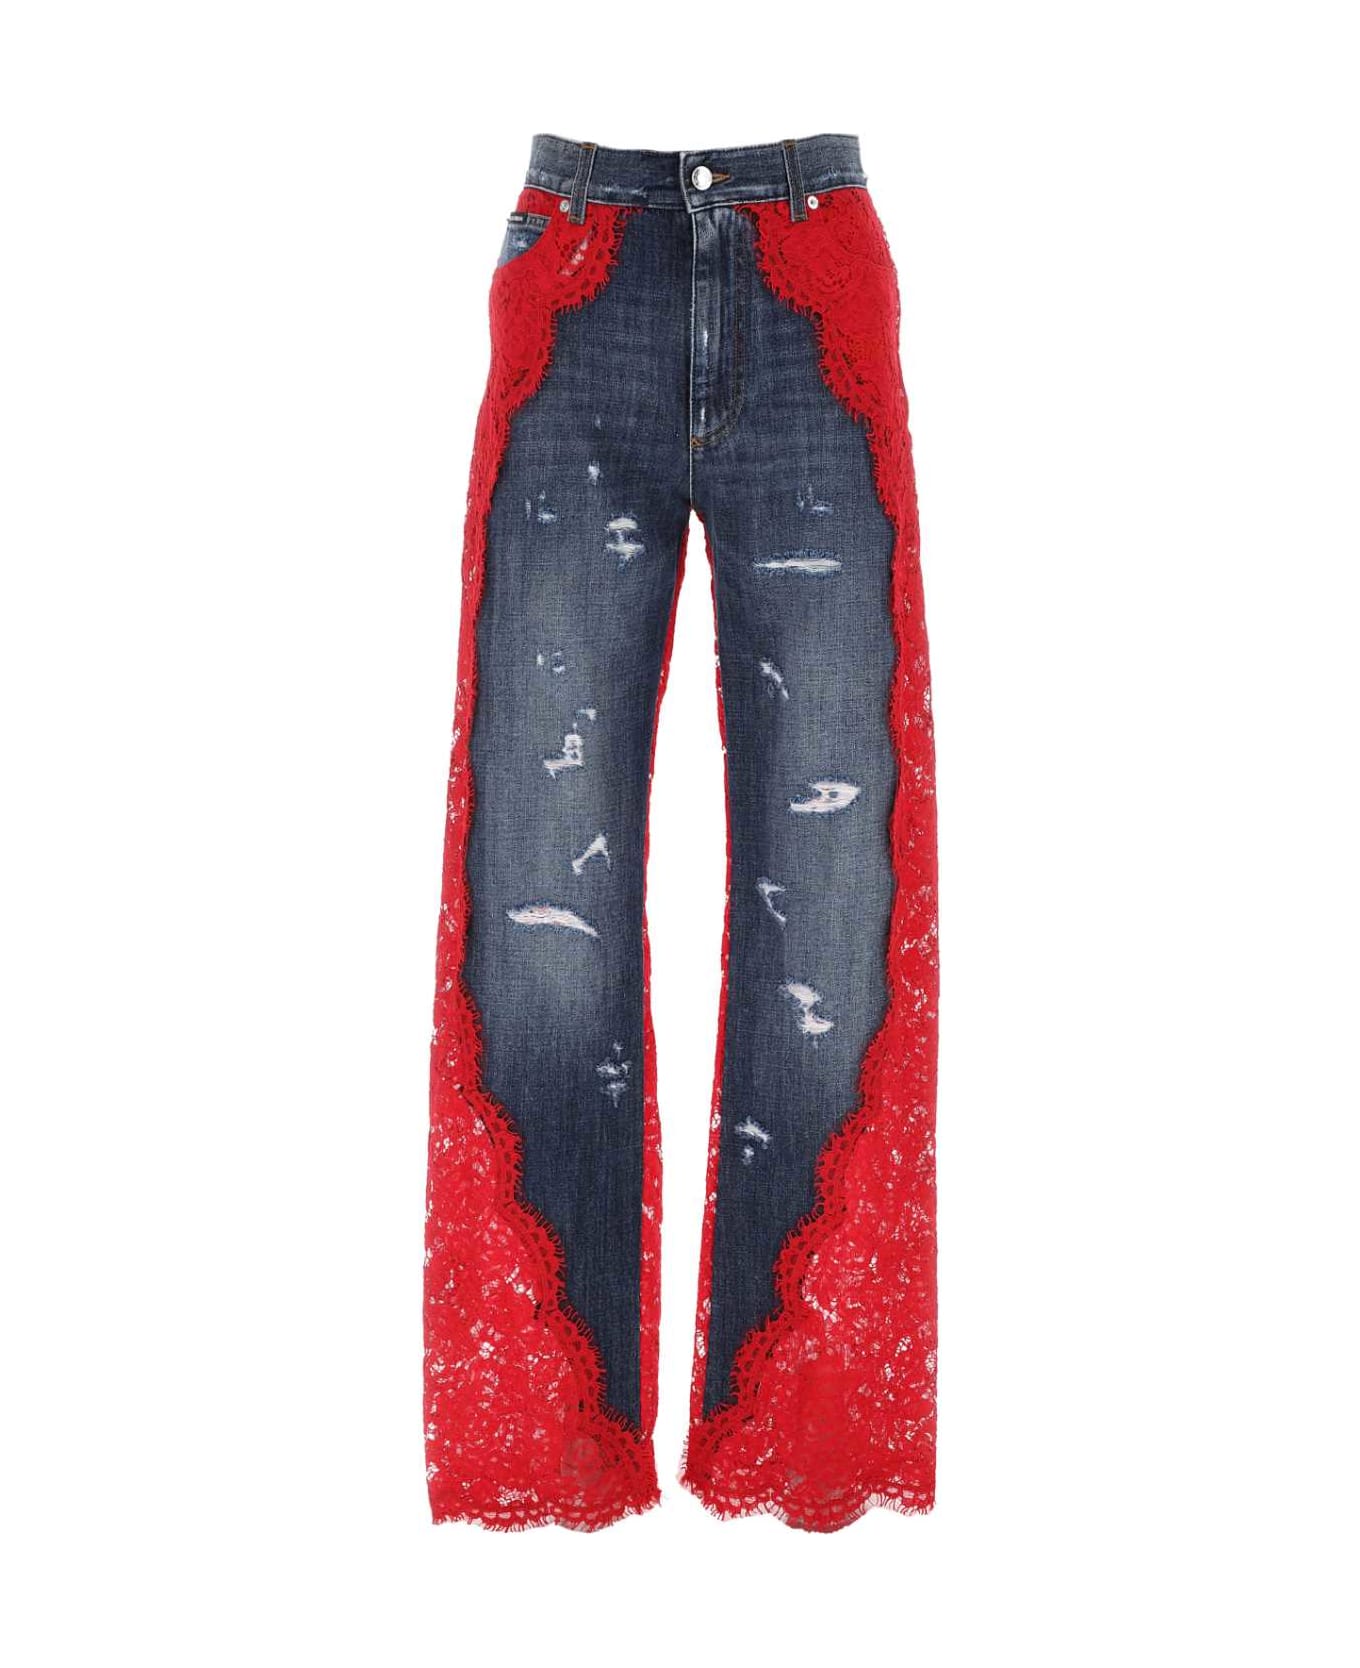 Dolce & Gabbana Two-tone Denim And Lace Jeans - Multicolor デニム